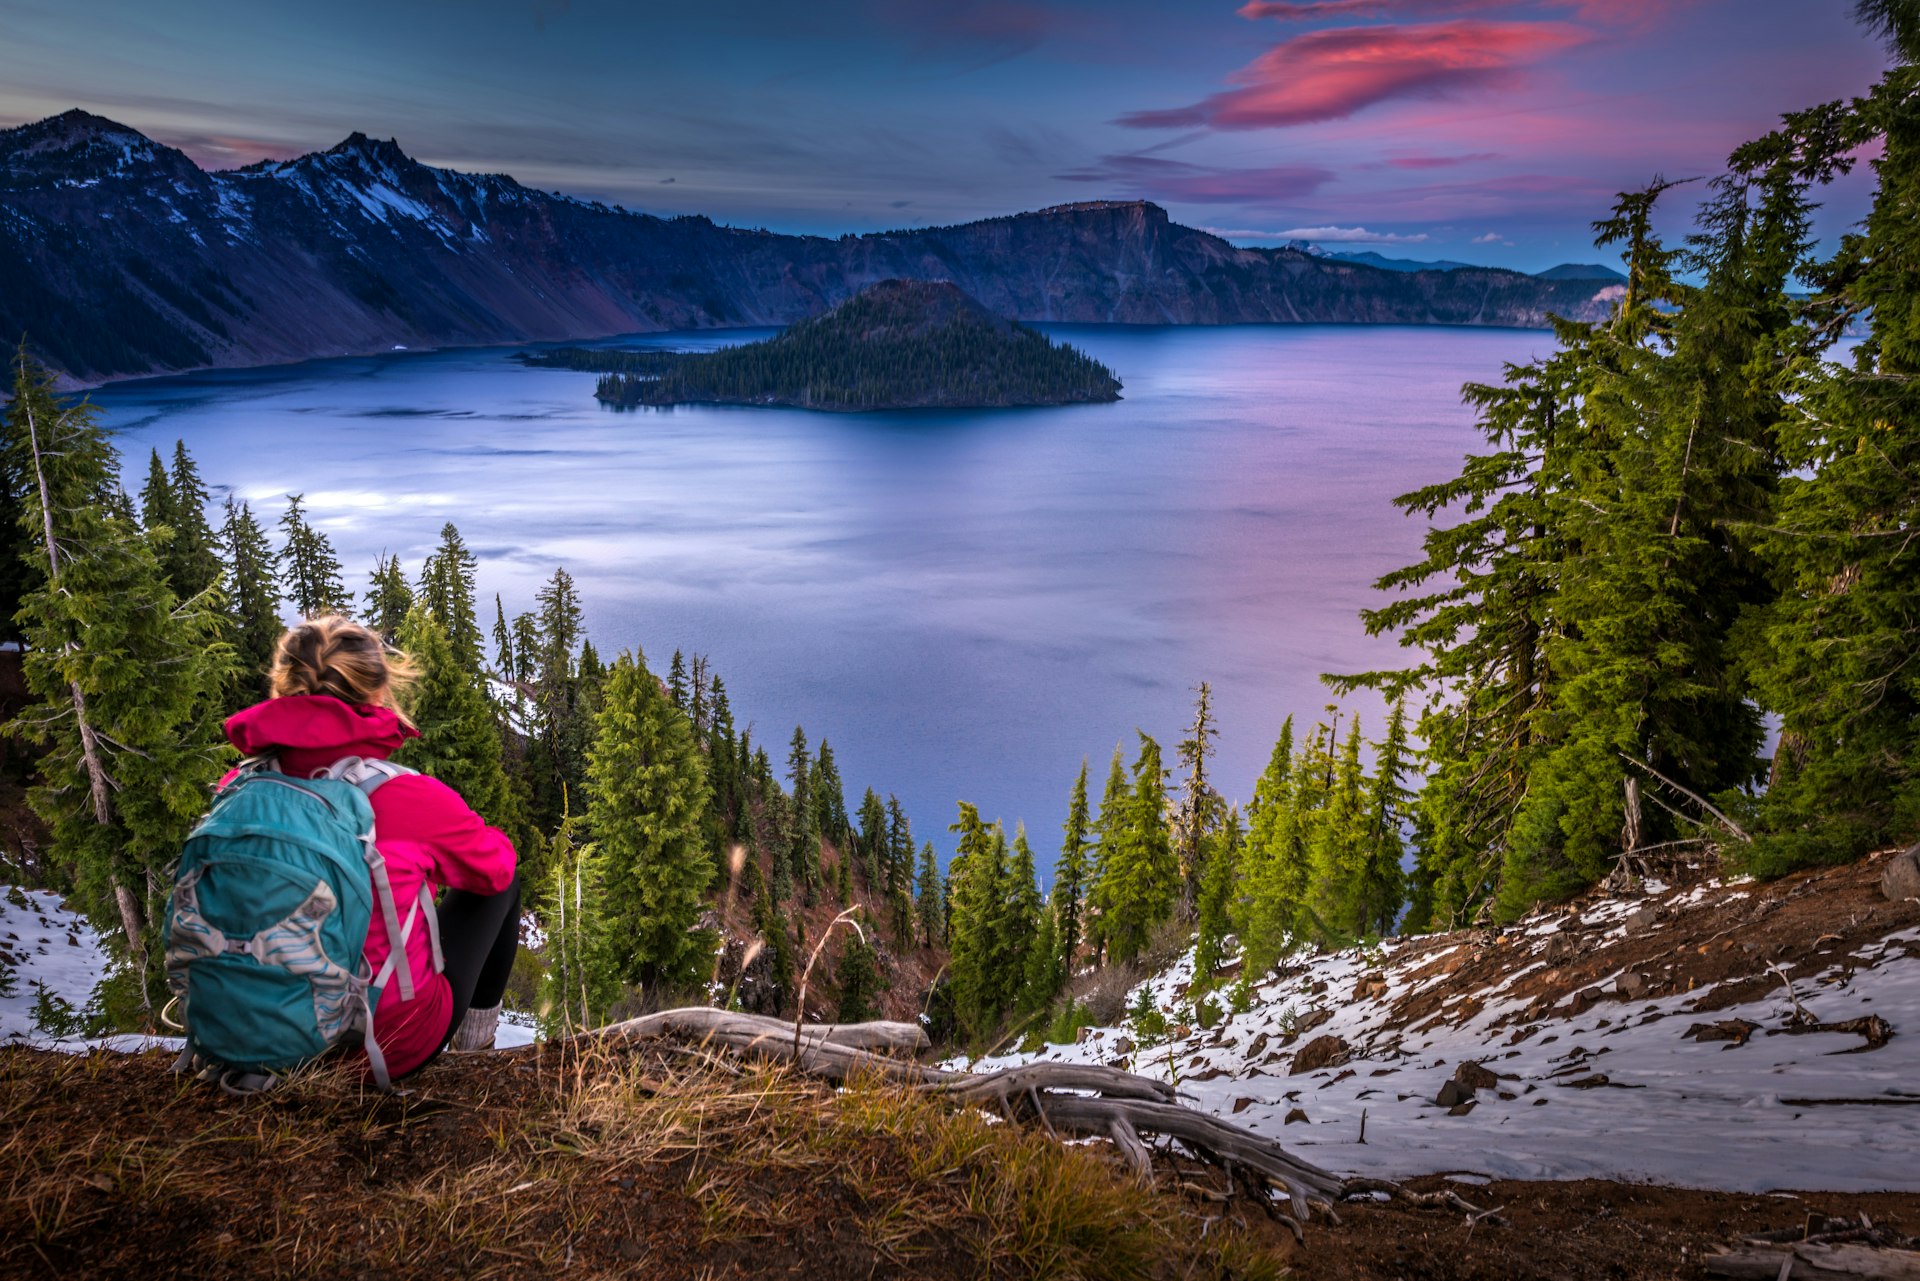 A hiker sits on a ridge overlooking a lake